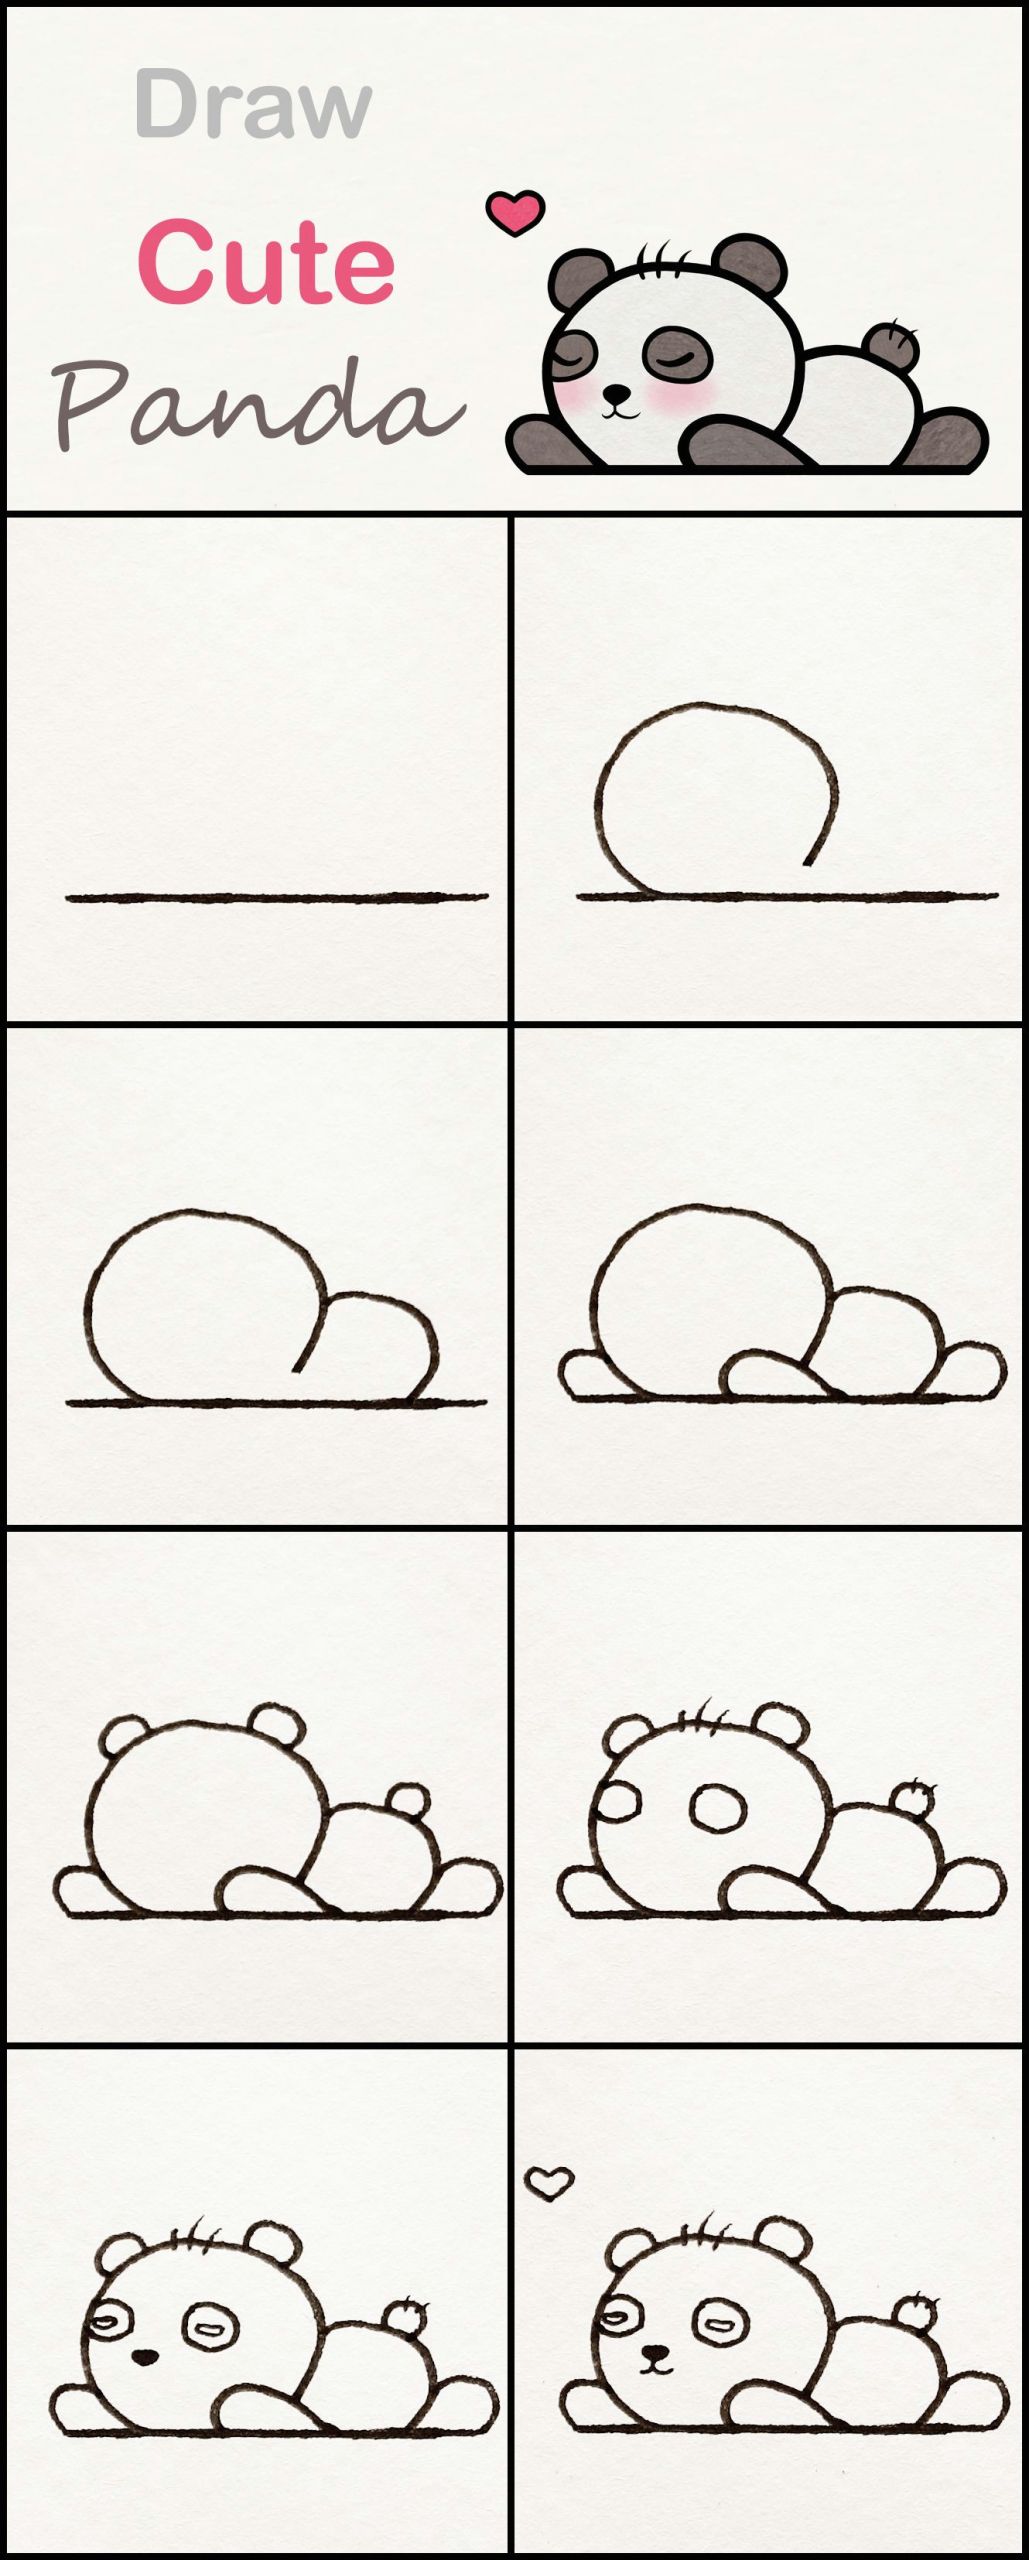 How to Draw Cute Simple Animals Learn How to Draw A Cute Baby Panda Step by Step A Very